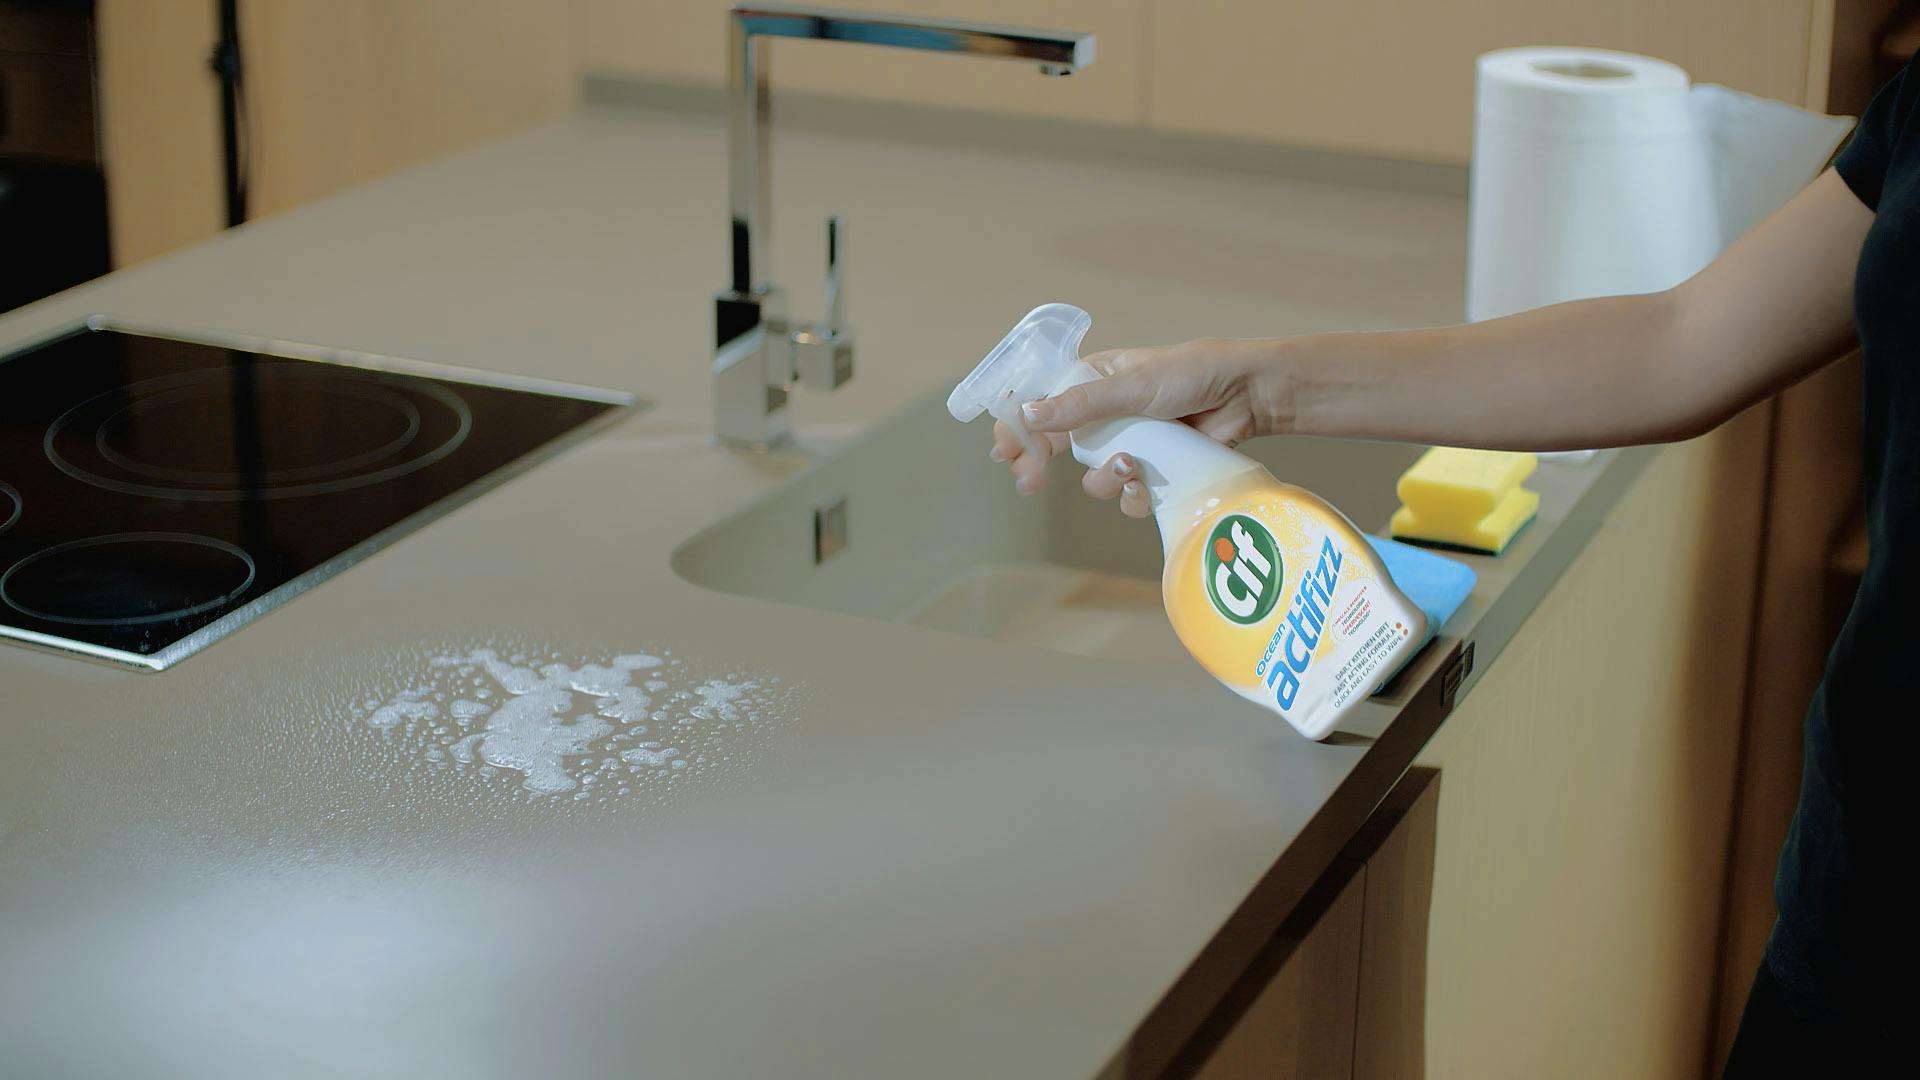 Silestone Quartz Surface Maintenance, What Can You Use To Clean Silestone Countertops